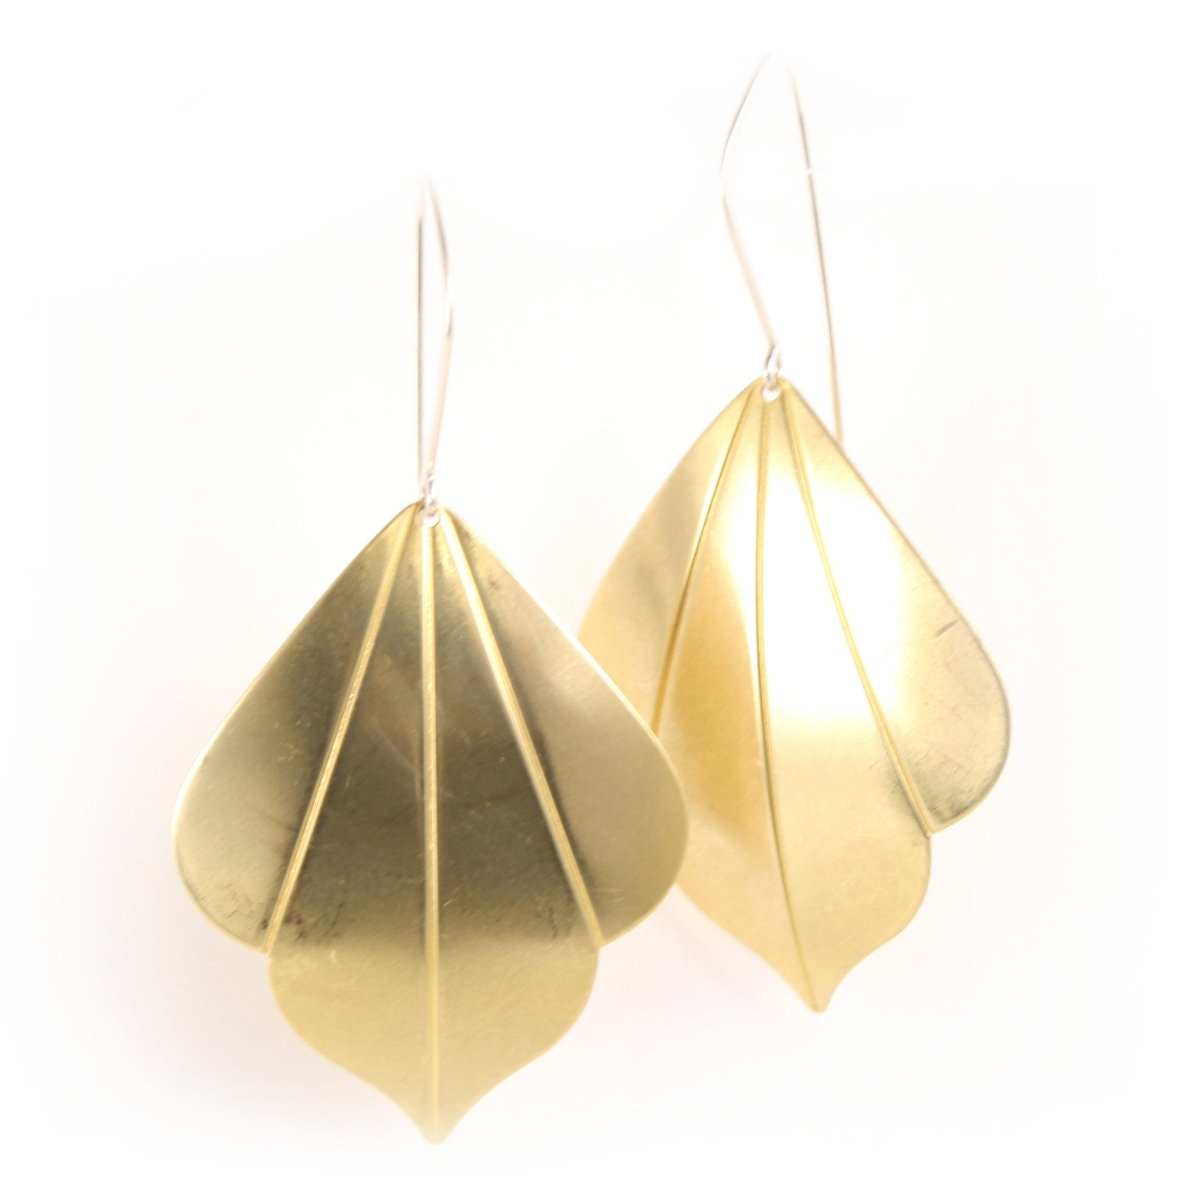 Bright golden deco shapes dangle from silver ear wires.